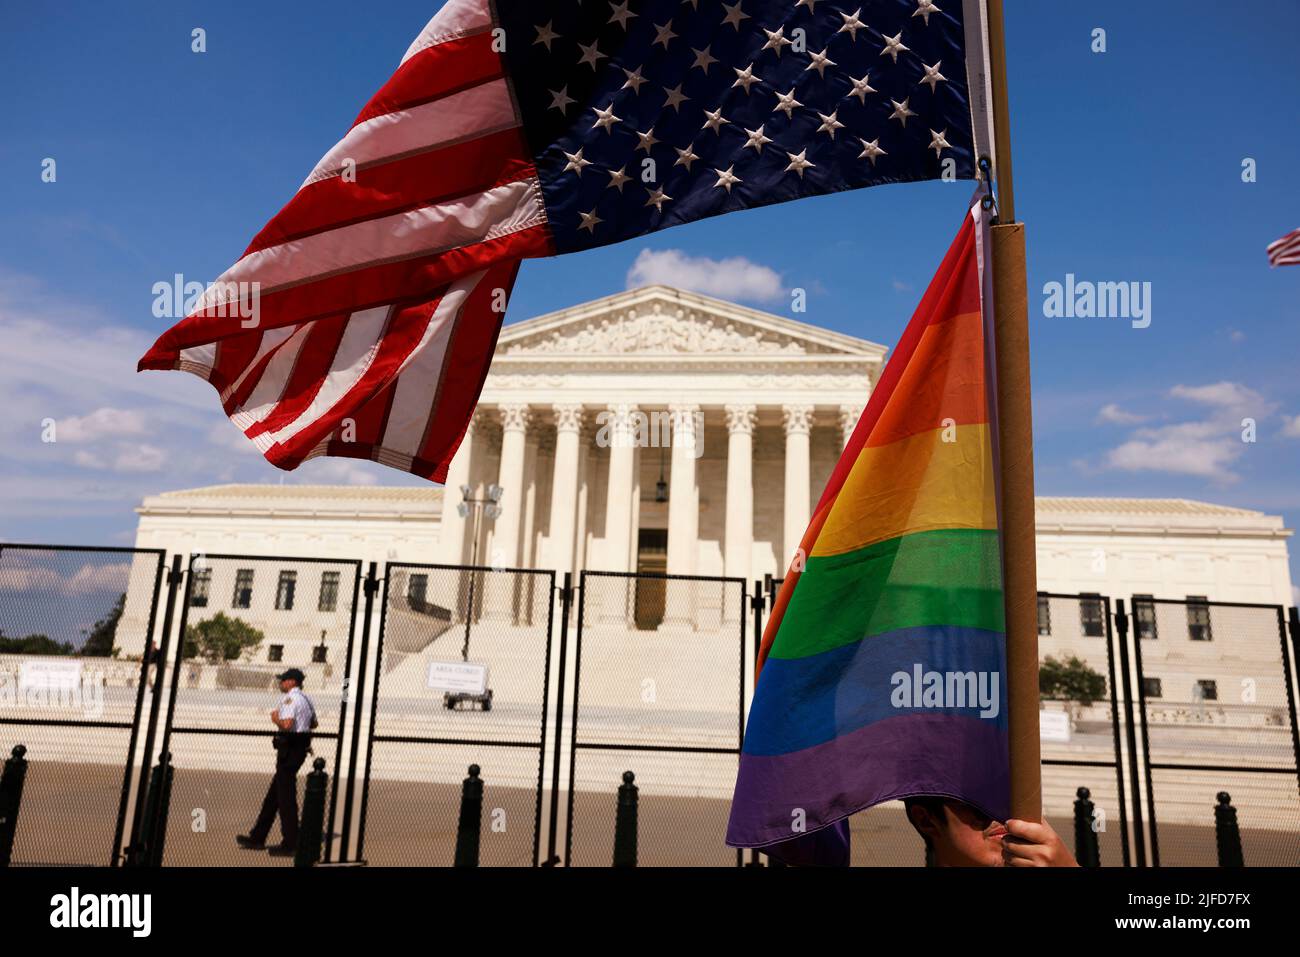 June 26, 2022, Washington, District of Columbia, United States: An American flag flies upside down next to a Pride flag outside the Supreme Court during a two day protest. More than 100 demonstrators gathered outside the Supreme Court of United States for an abortion rights rally. The rally comes one week after the Supreme Court of the United States issued its opinion in Dobbs v. Jackson Women's Health Organization which overturned Roe v. Wade and the right to abortion access. (Credit Image: © Jeremy Hogan/SOPA Images via ZUMA Press Wire) Stock Photo